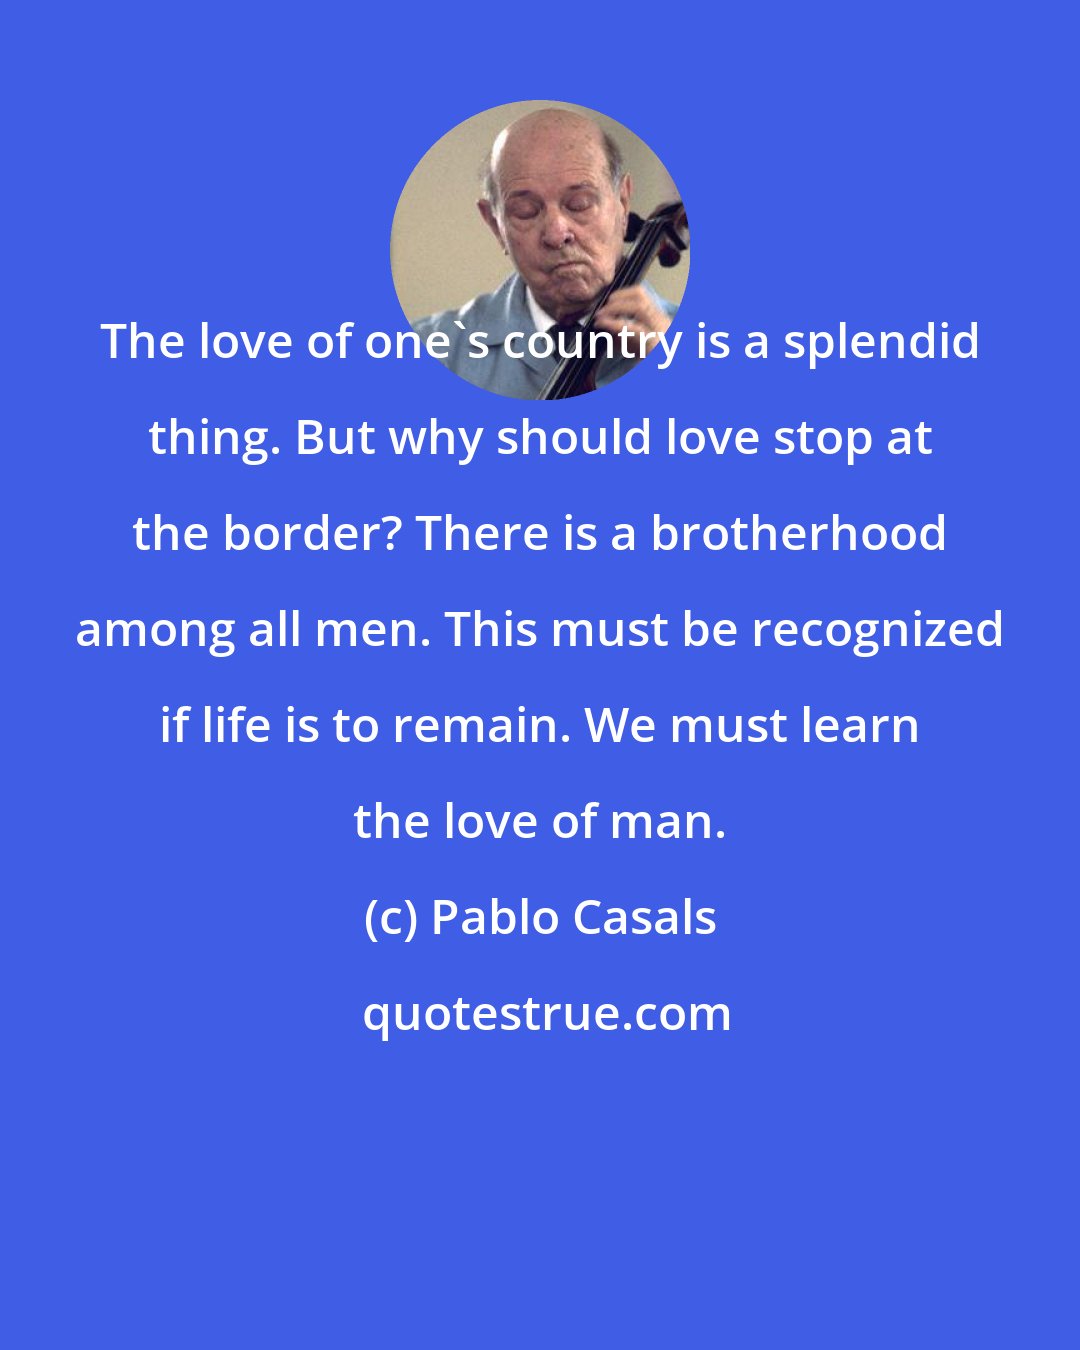 Pablo Casals: The love of one's country is a splendid thing. But why should love stop at the border? There is a brotherhood among all men. This must be recognized if life is to remain. We must learn the love of man.